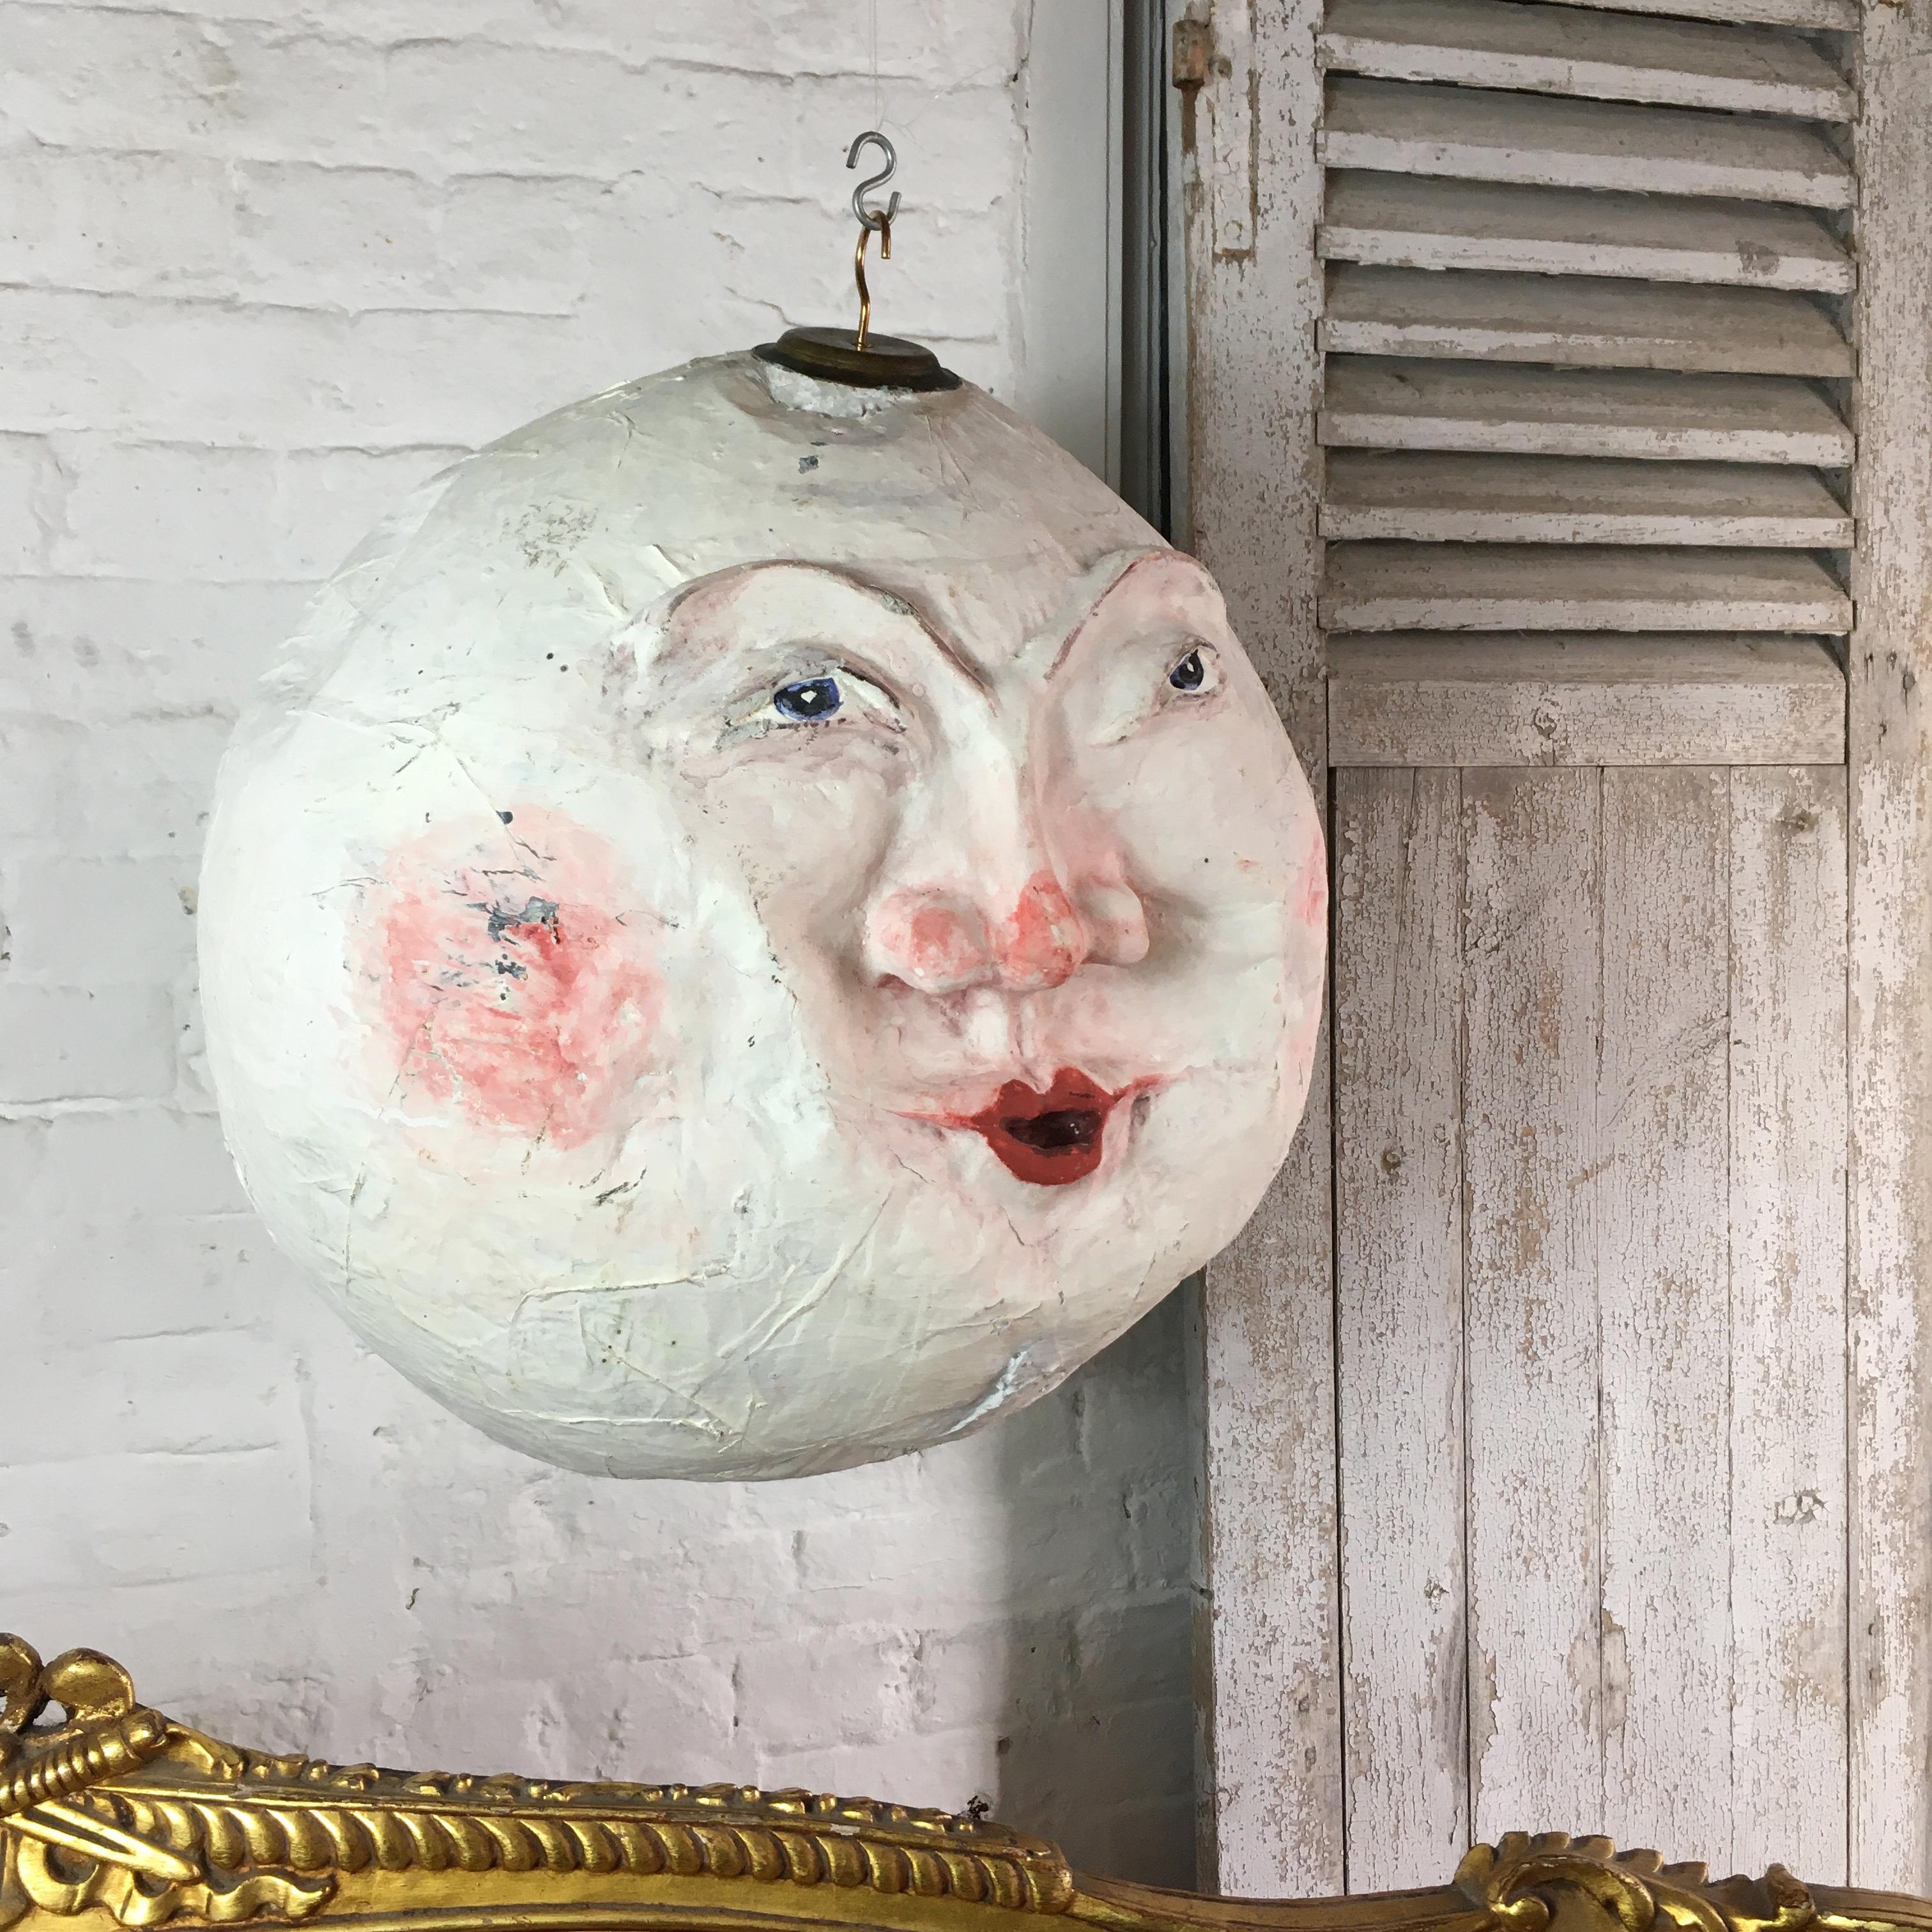 1920s 'Man In The Moon' Papier mâché Prop. Theatre / stage prop. Handmade and finished with beautiful enigmatic hand painted face. 50cm height, 50cm width approx. Metal plate and hook set into the papier mâché at the top for hanging. Fantastic